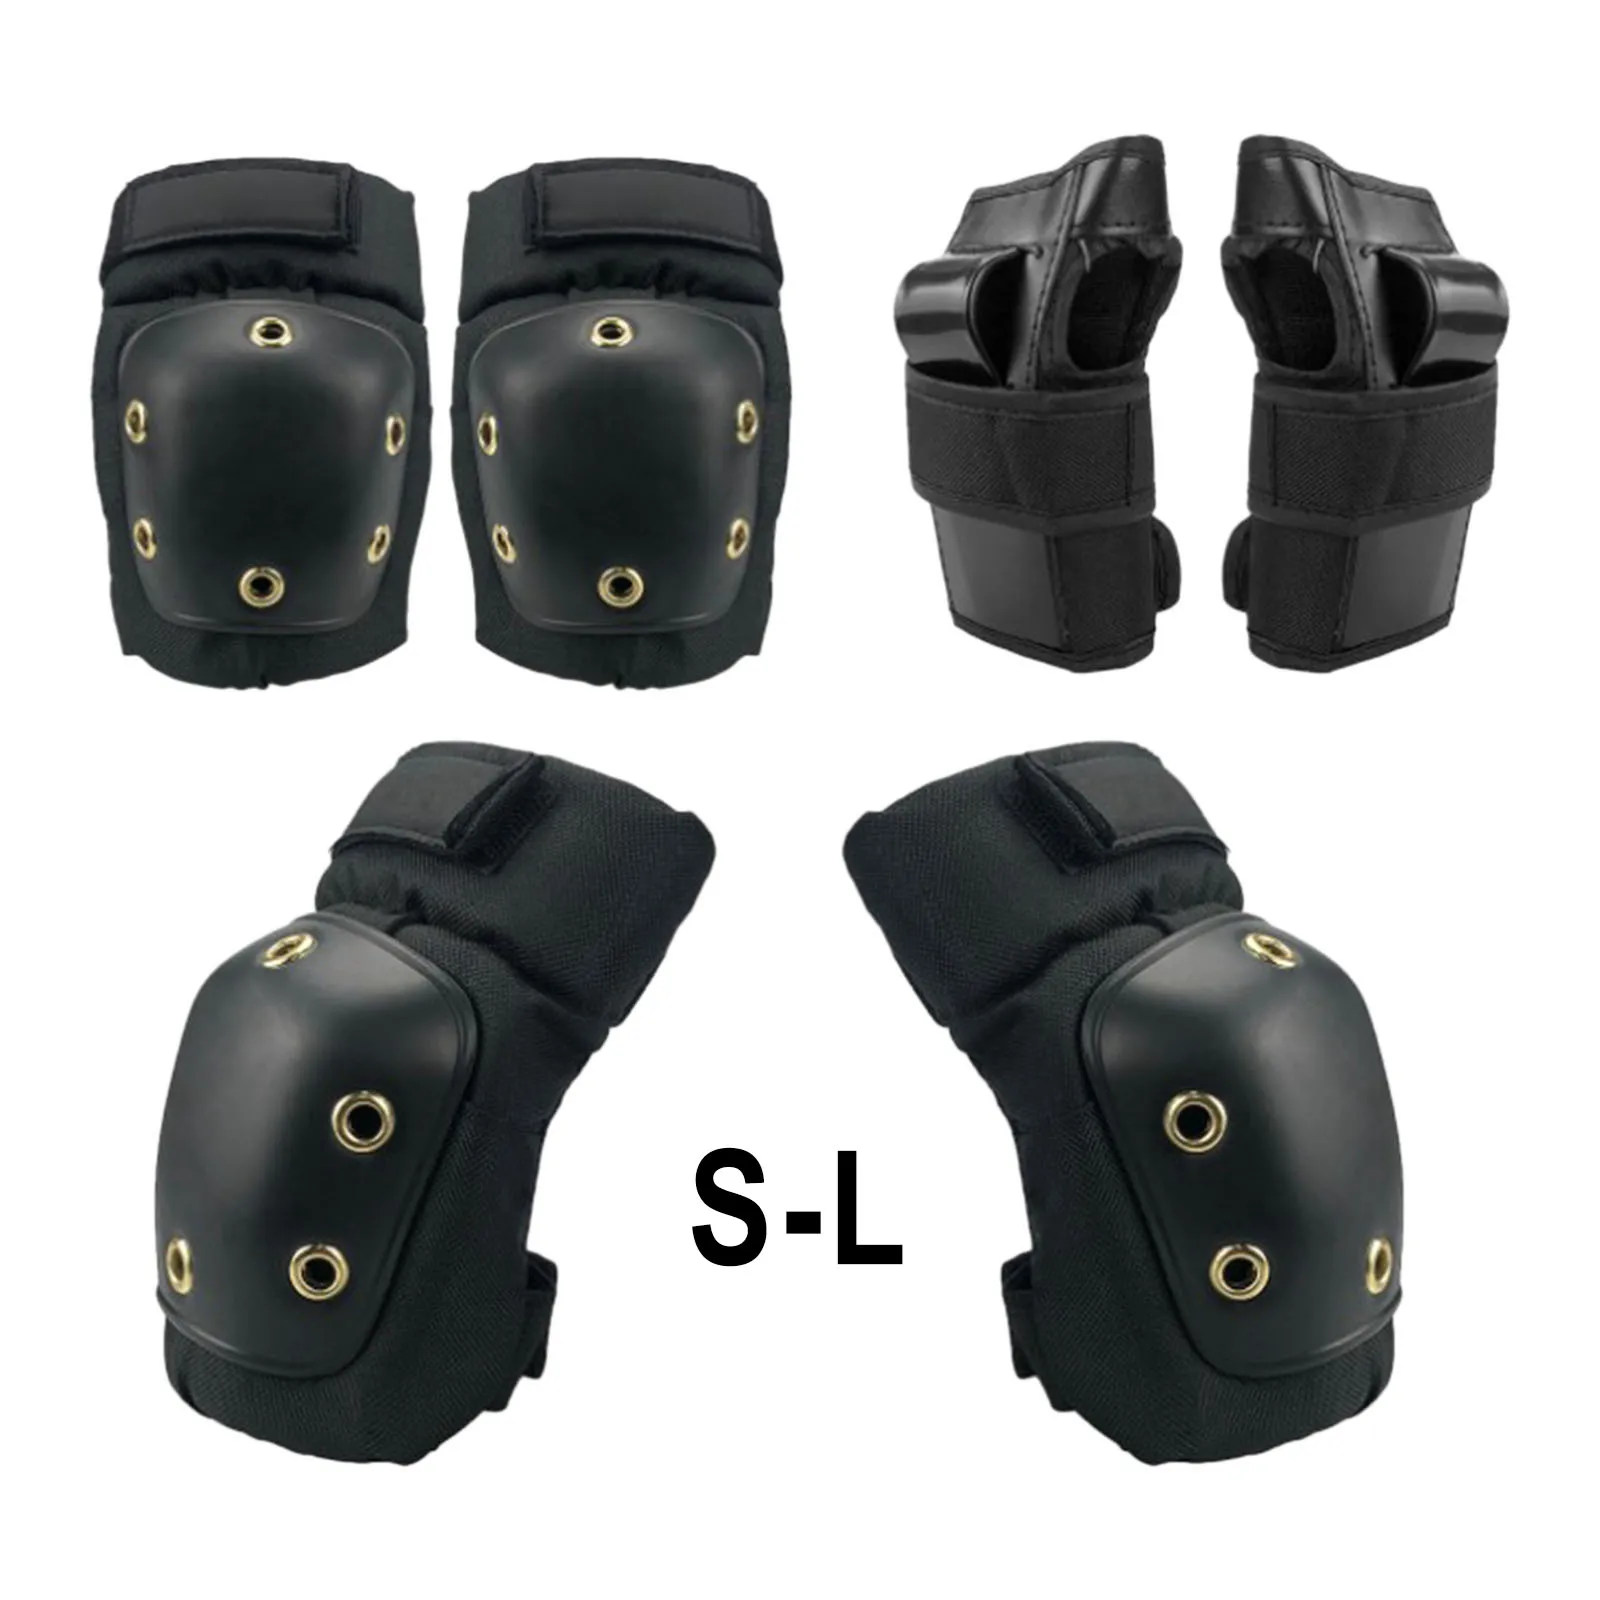 UK Kids Roller Skate Wrist/Knee/Elbow Pad Outdoor Protective Safety Gear 6pc/Set 